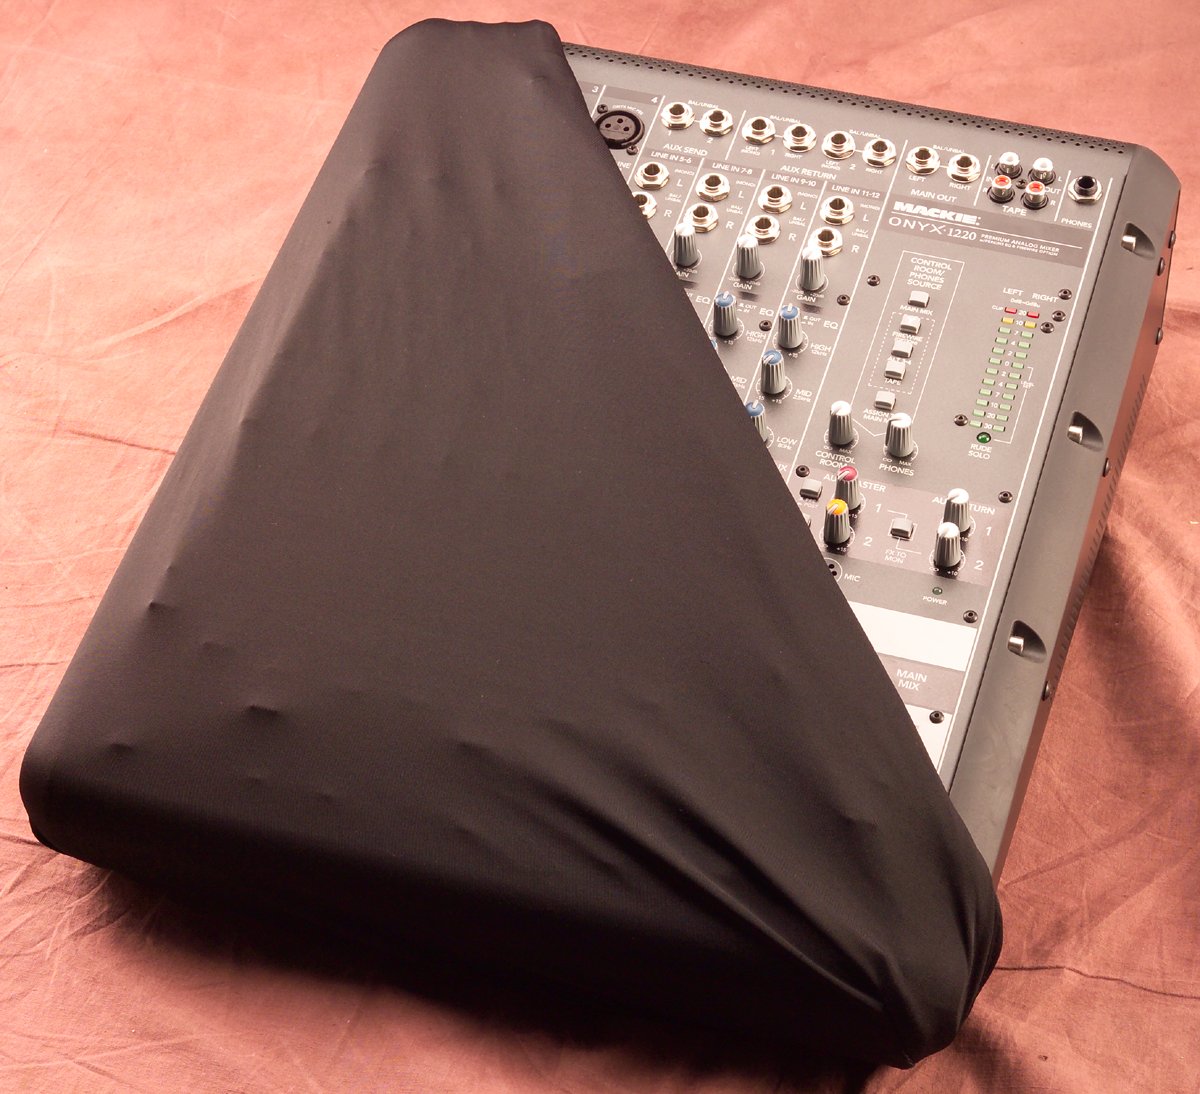 Stretchy Mixer & Equipment Cover Fits Gear Up to 22" X 22" X 6"